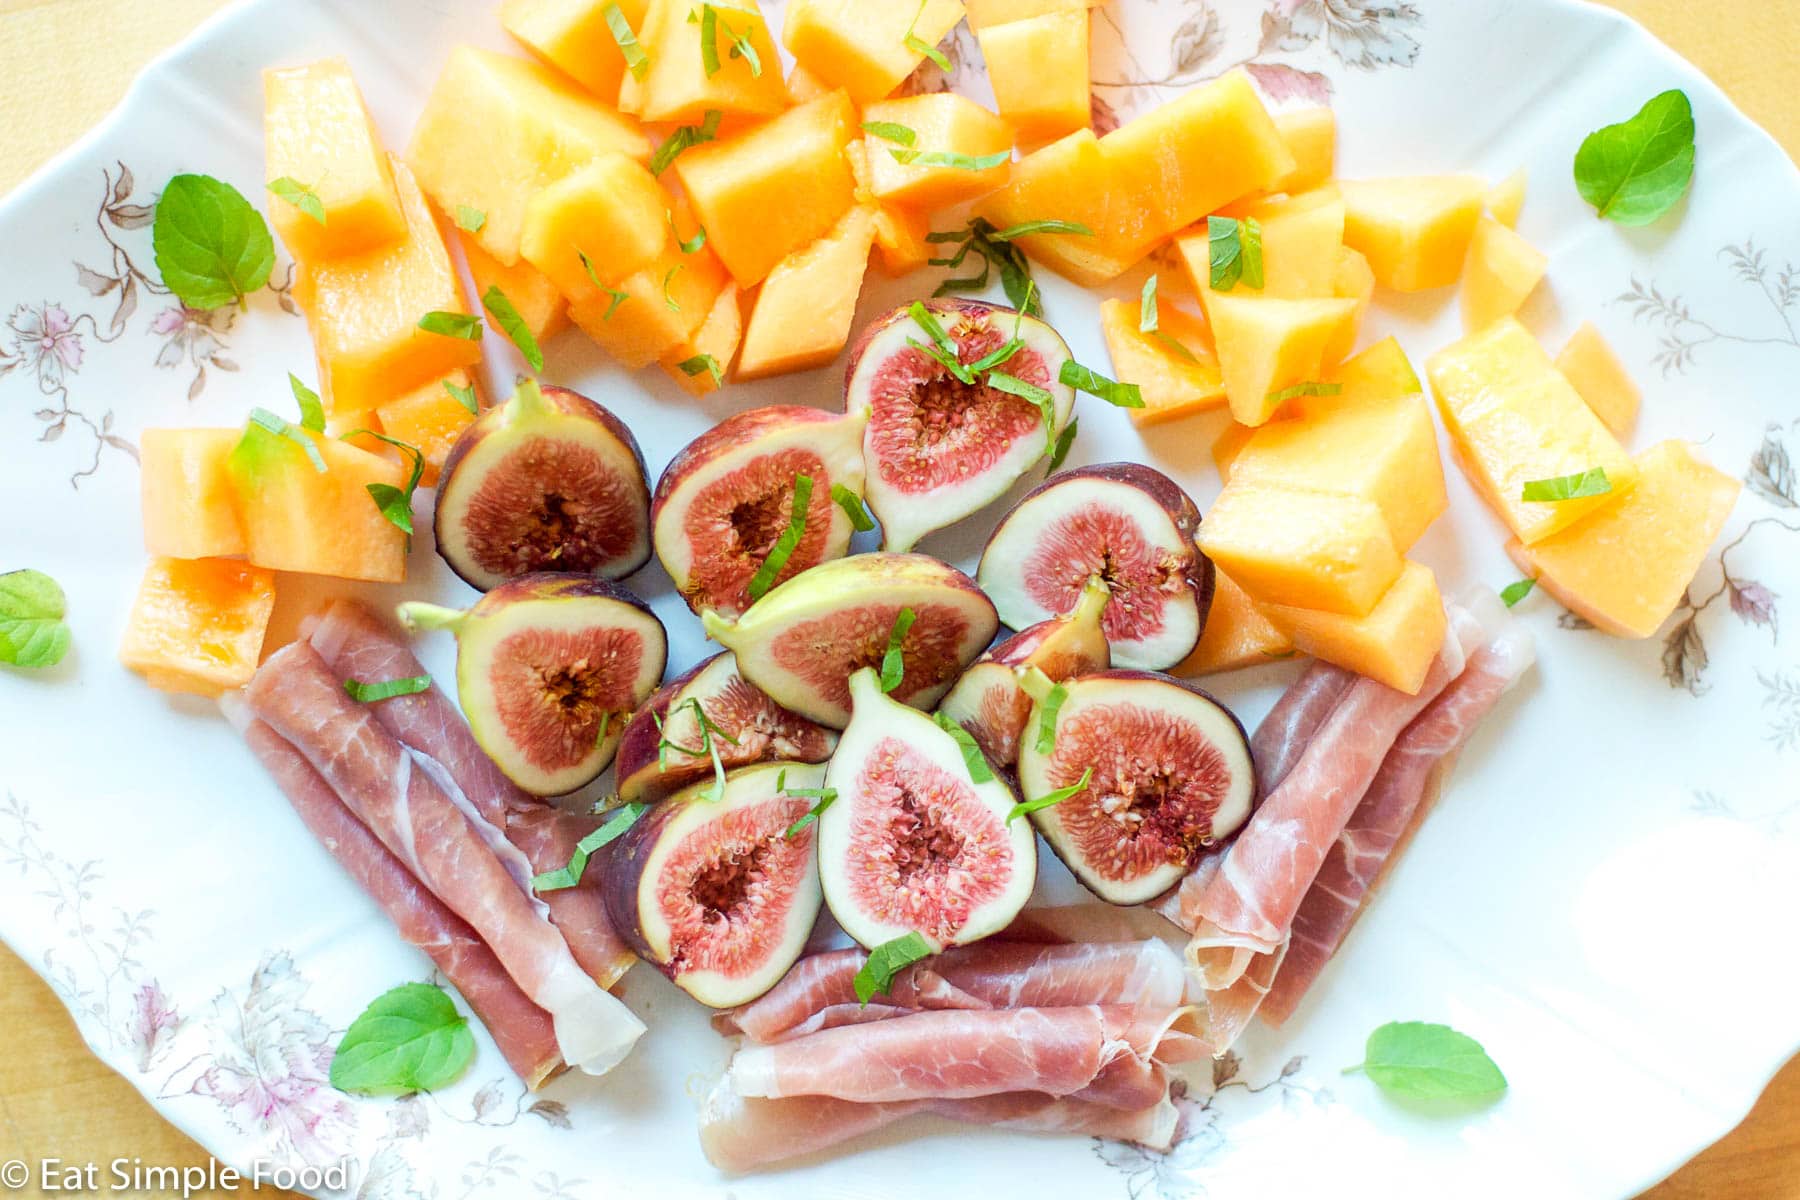 Halved figs, rolled prosciutto, chunks of cantaloupe on a platter with small mint leaves.